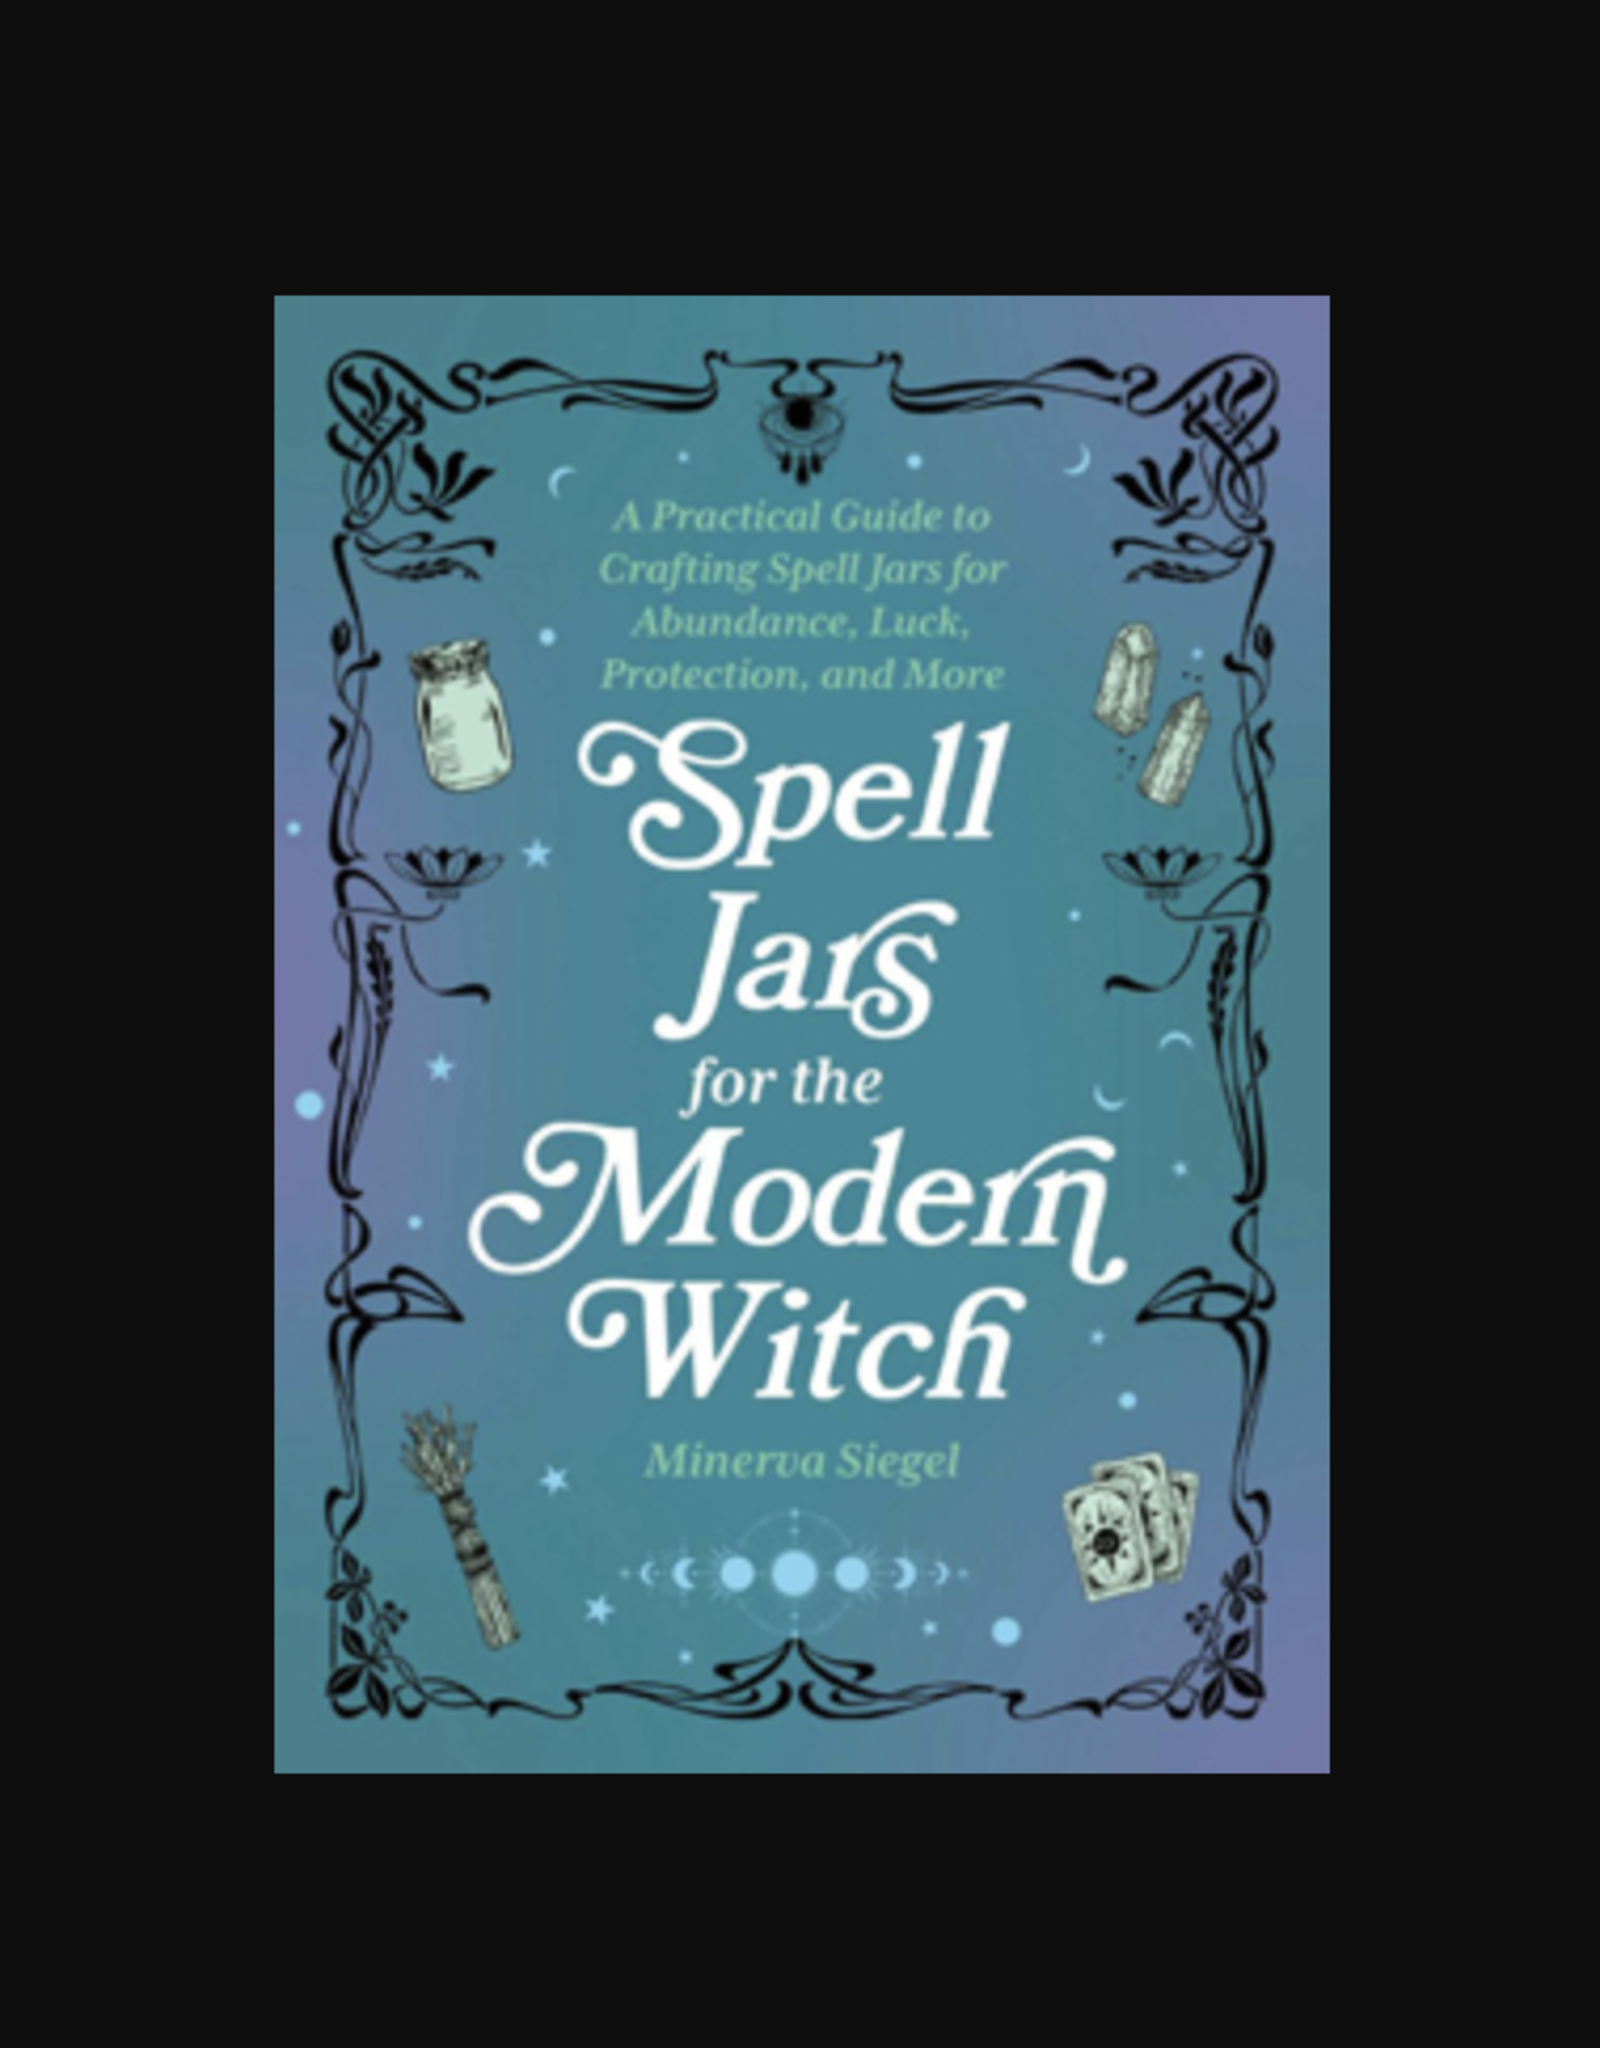 Spell Jars for the Modern Witch - Practical Guide to Crafting Spell Jars for Abundance, Luck, Protection, and More